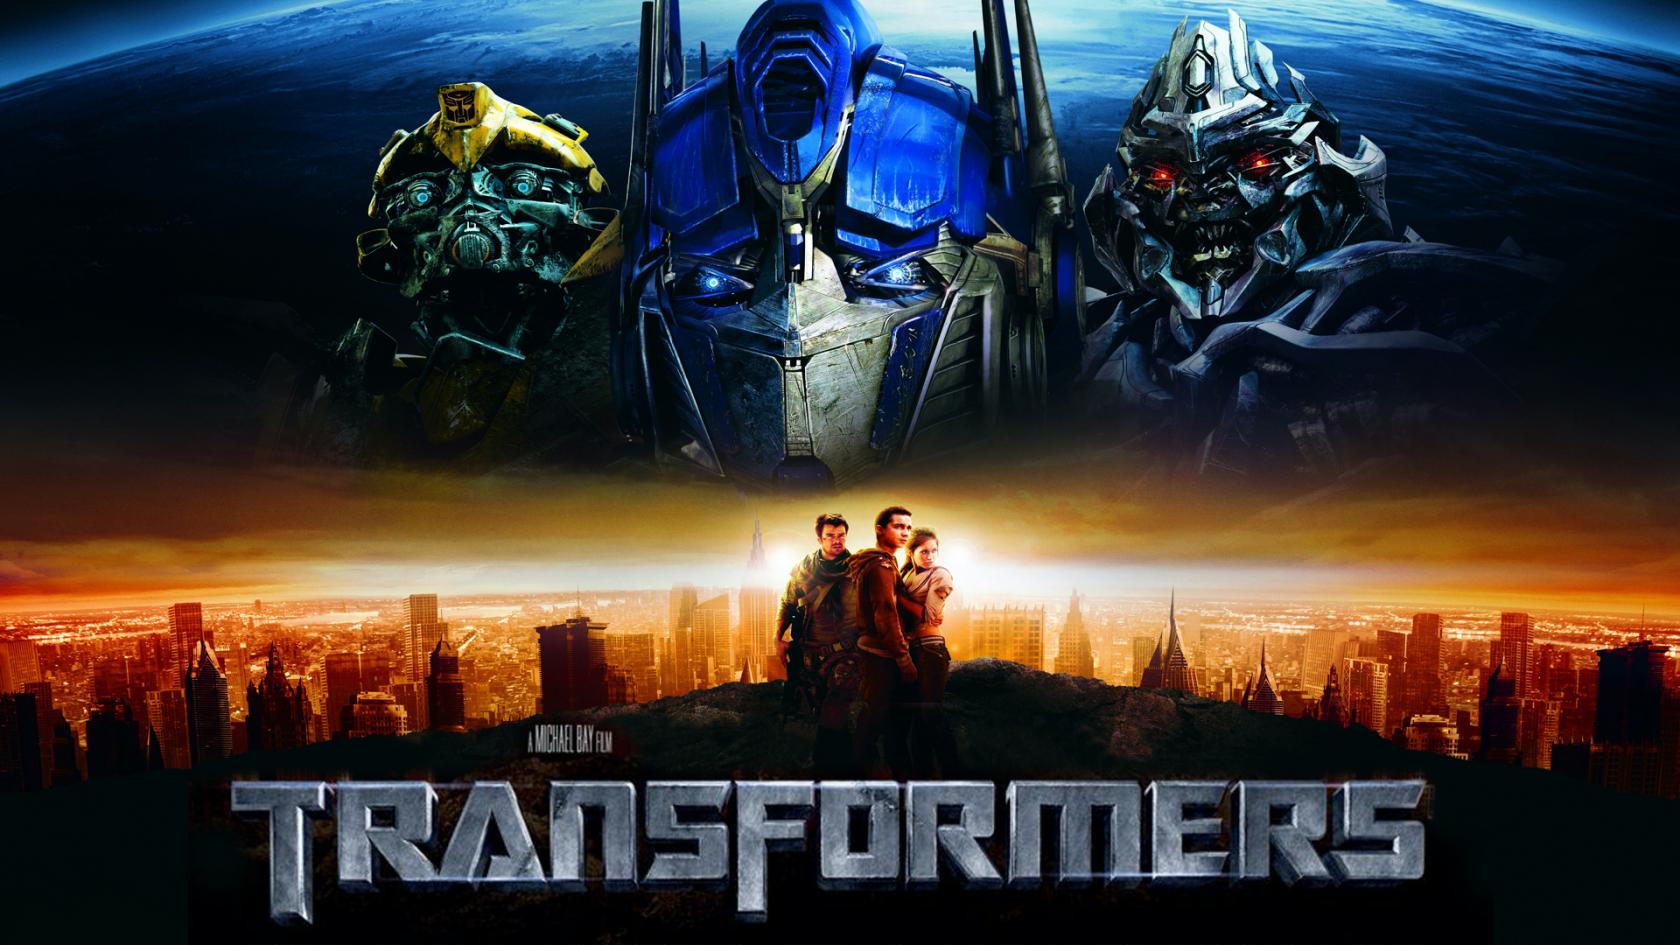 Transformers Animated Movie 1986 Hd Stream Openload Best